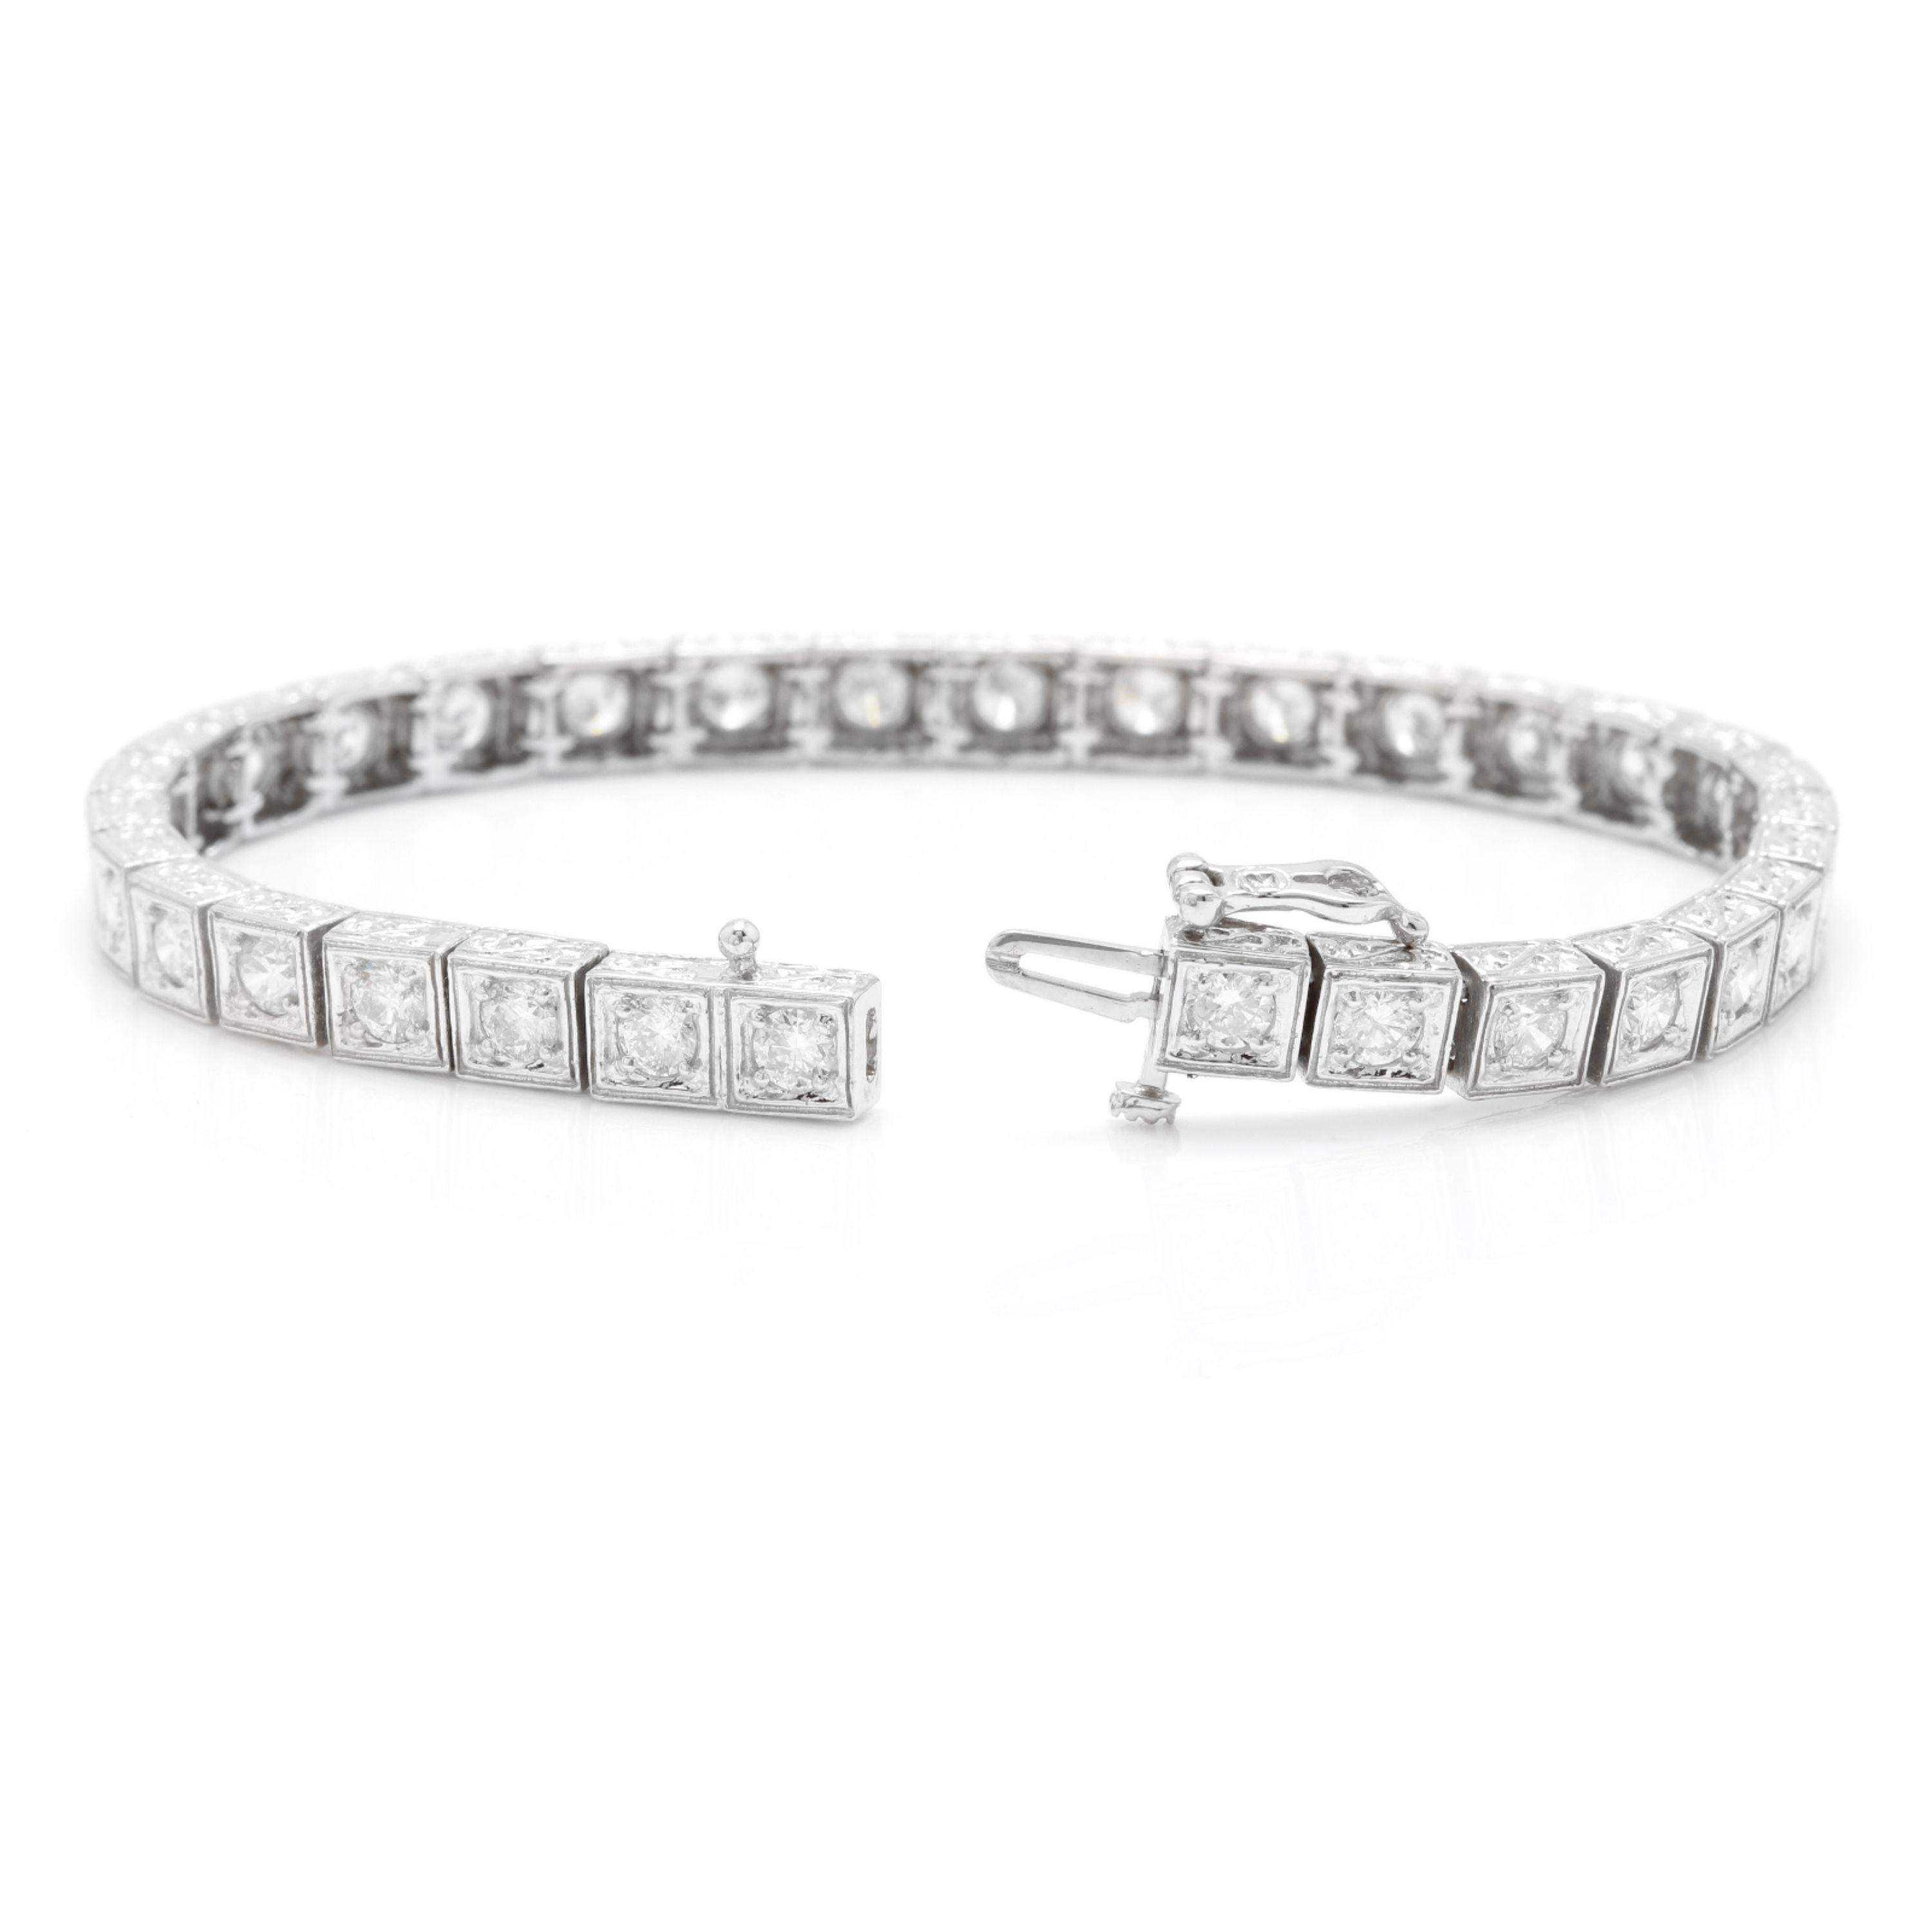 Very Impressive 3.20 Carats Natural Diamond 14K Solid White Gold Bracelet

STAMPED: 14K

Total Natural Round Diamonds Weight: Approx. 3.20 Carats (color G-H / Clarity SI1-SI2)

Bracelet Length is: 7 inches

Width: 5mm

Thickness: 3.45mm

Bracelet